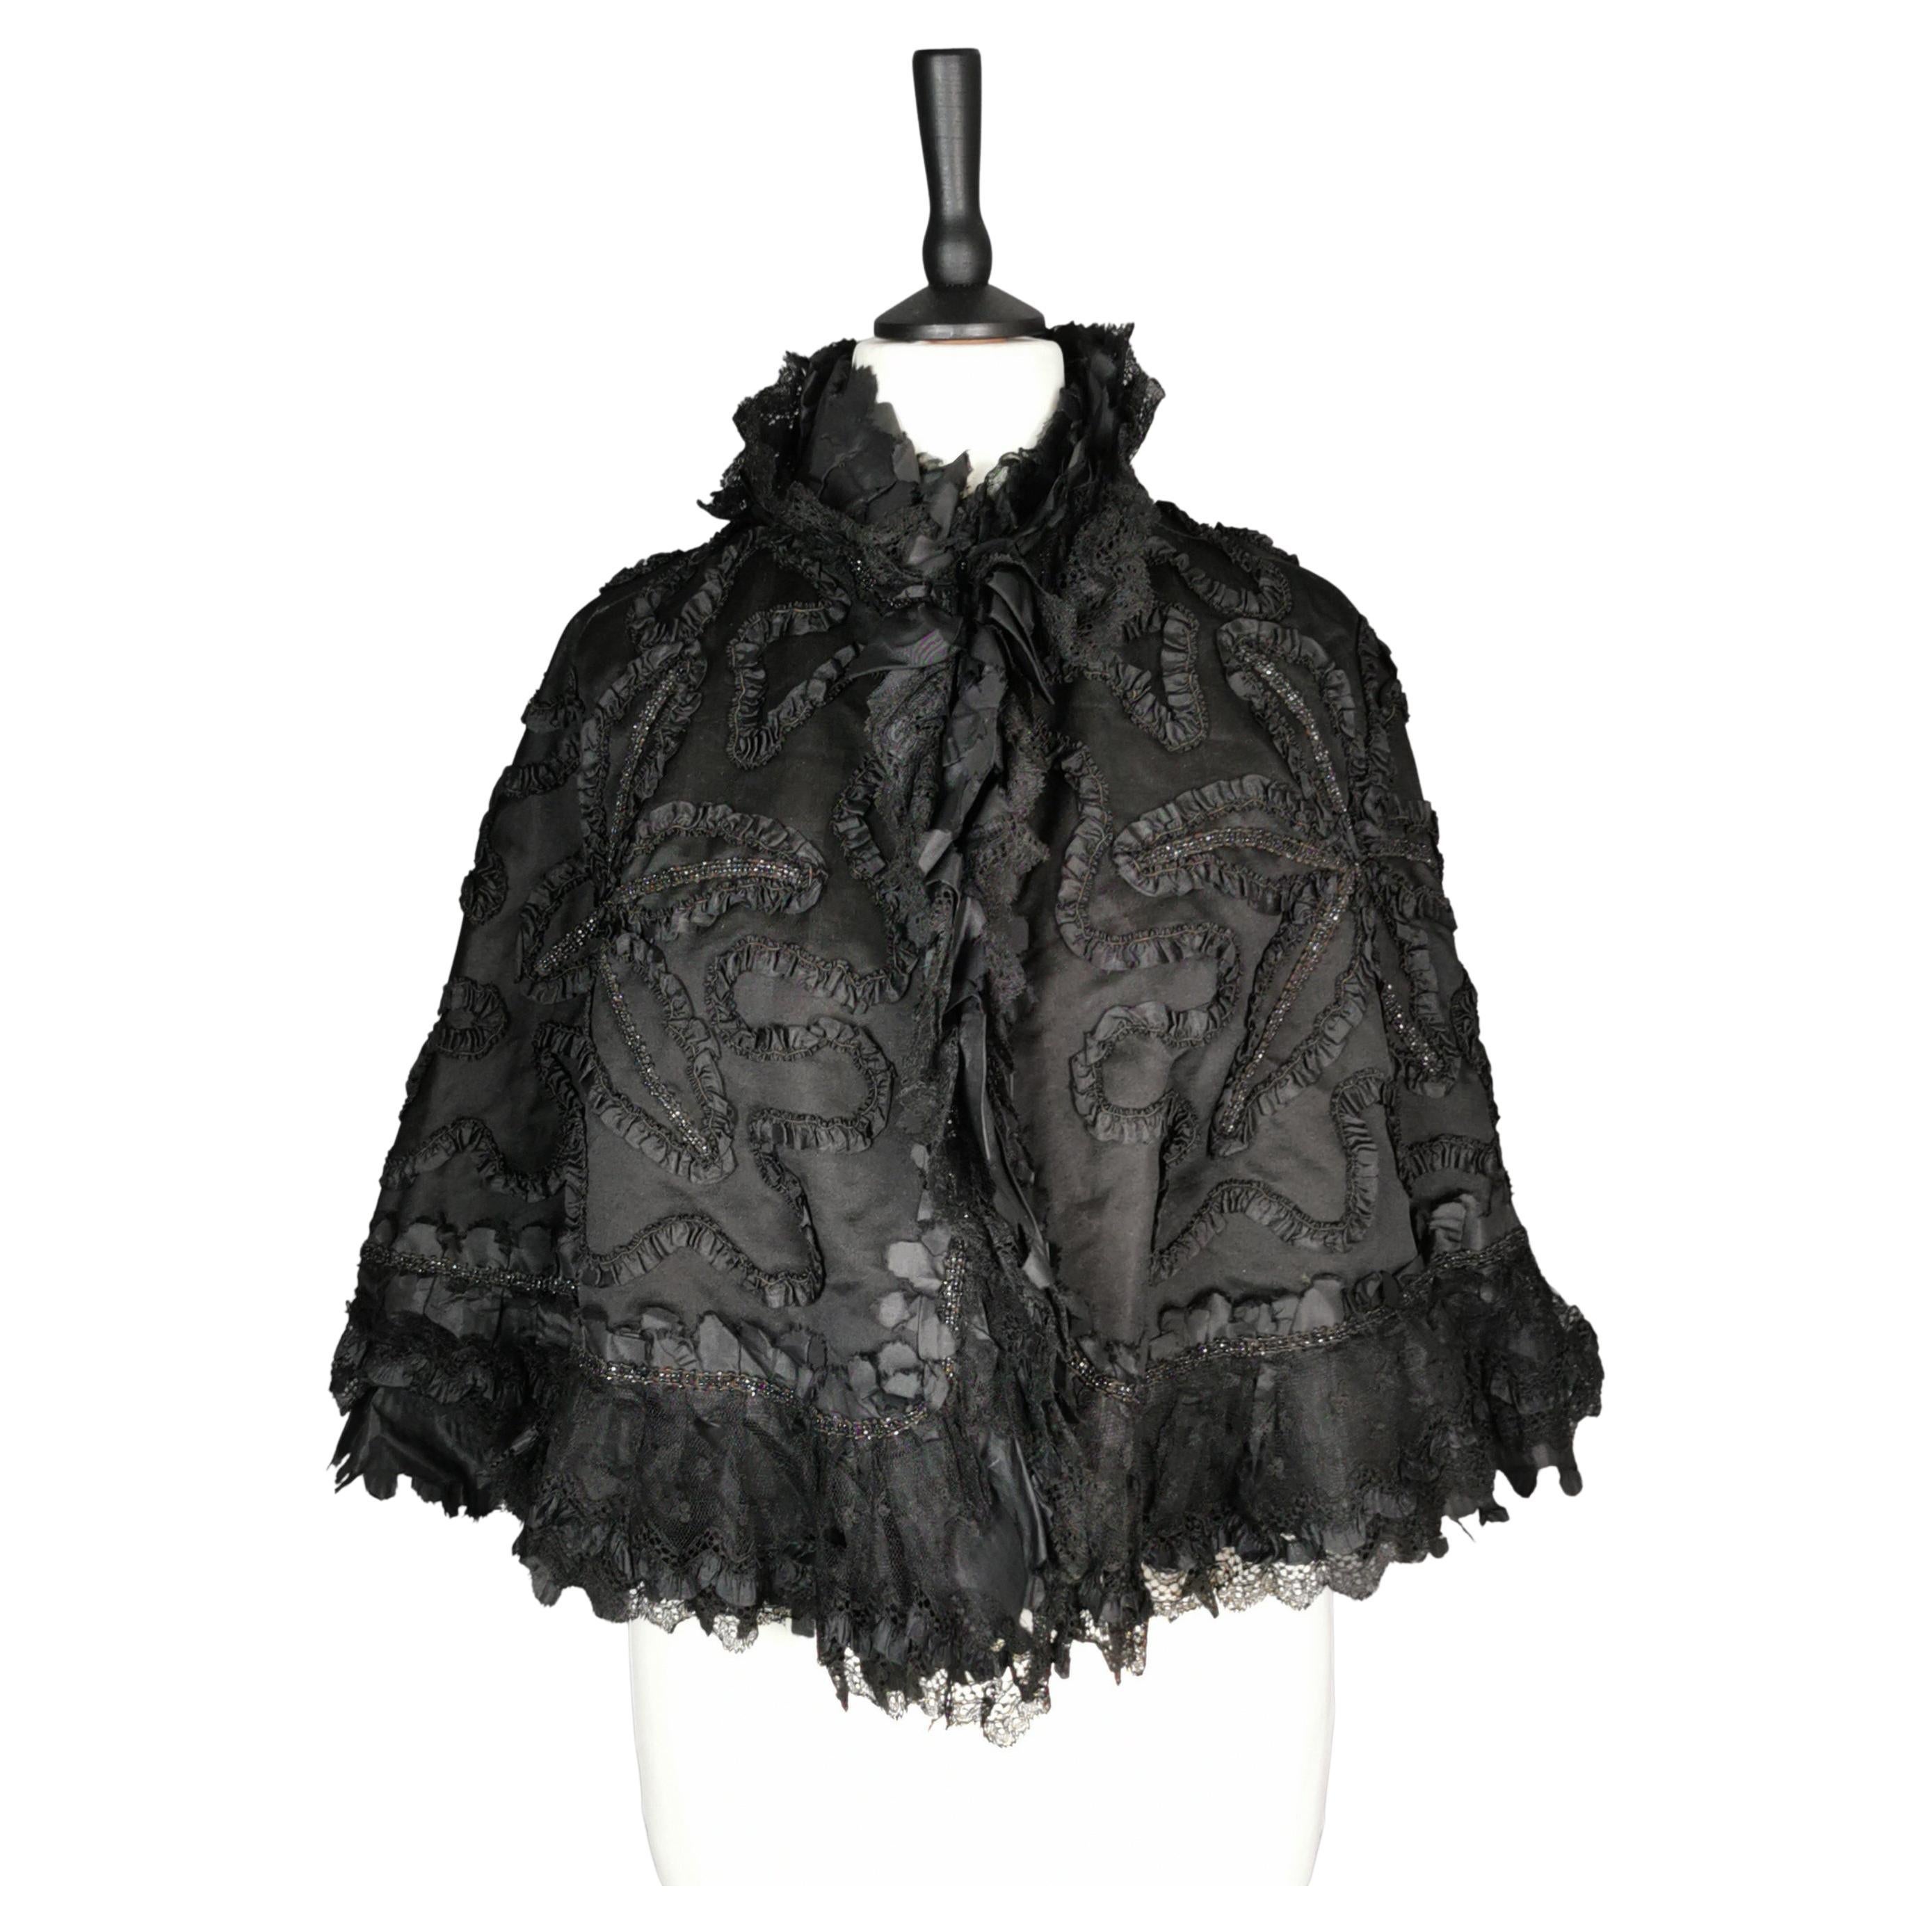 Antique Victorian mourning cape, French jet, taffeta, silk and lace 